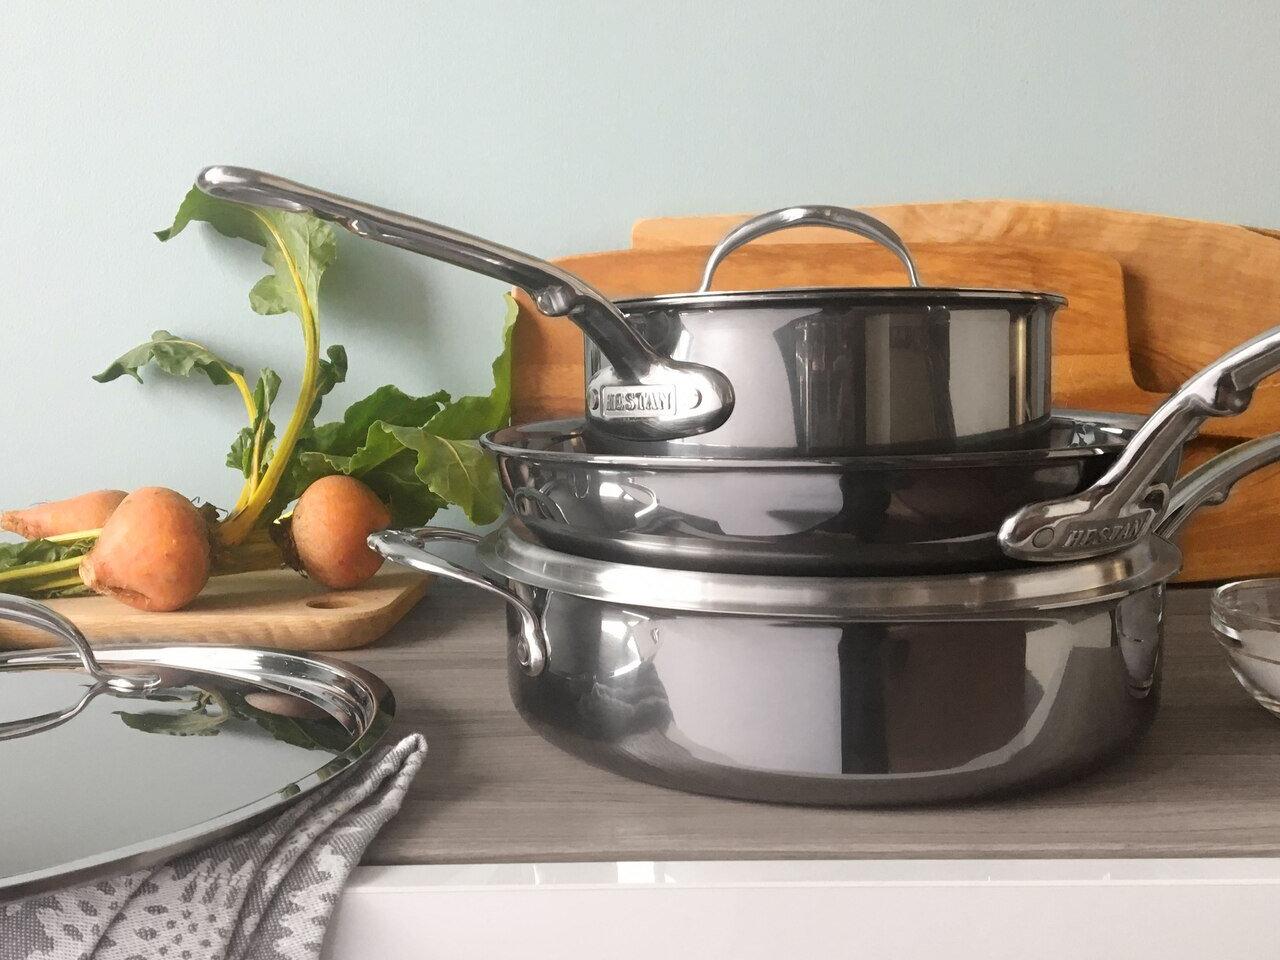 All-Clad Stainless Steel Skillet October Prime Day Sale